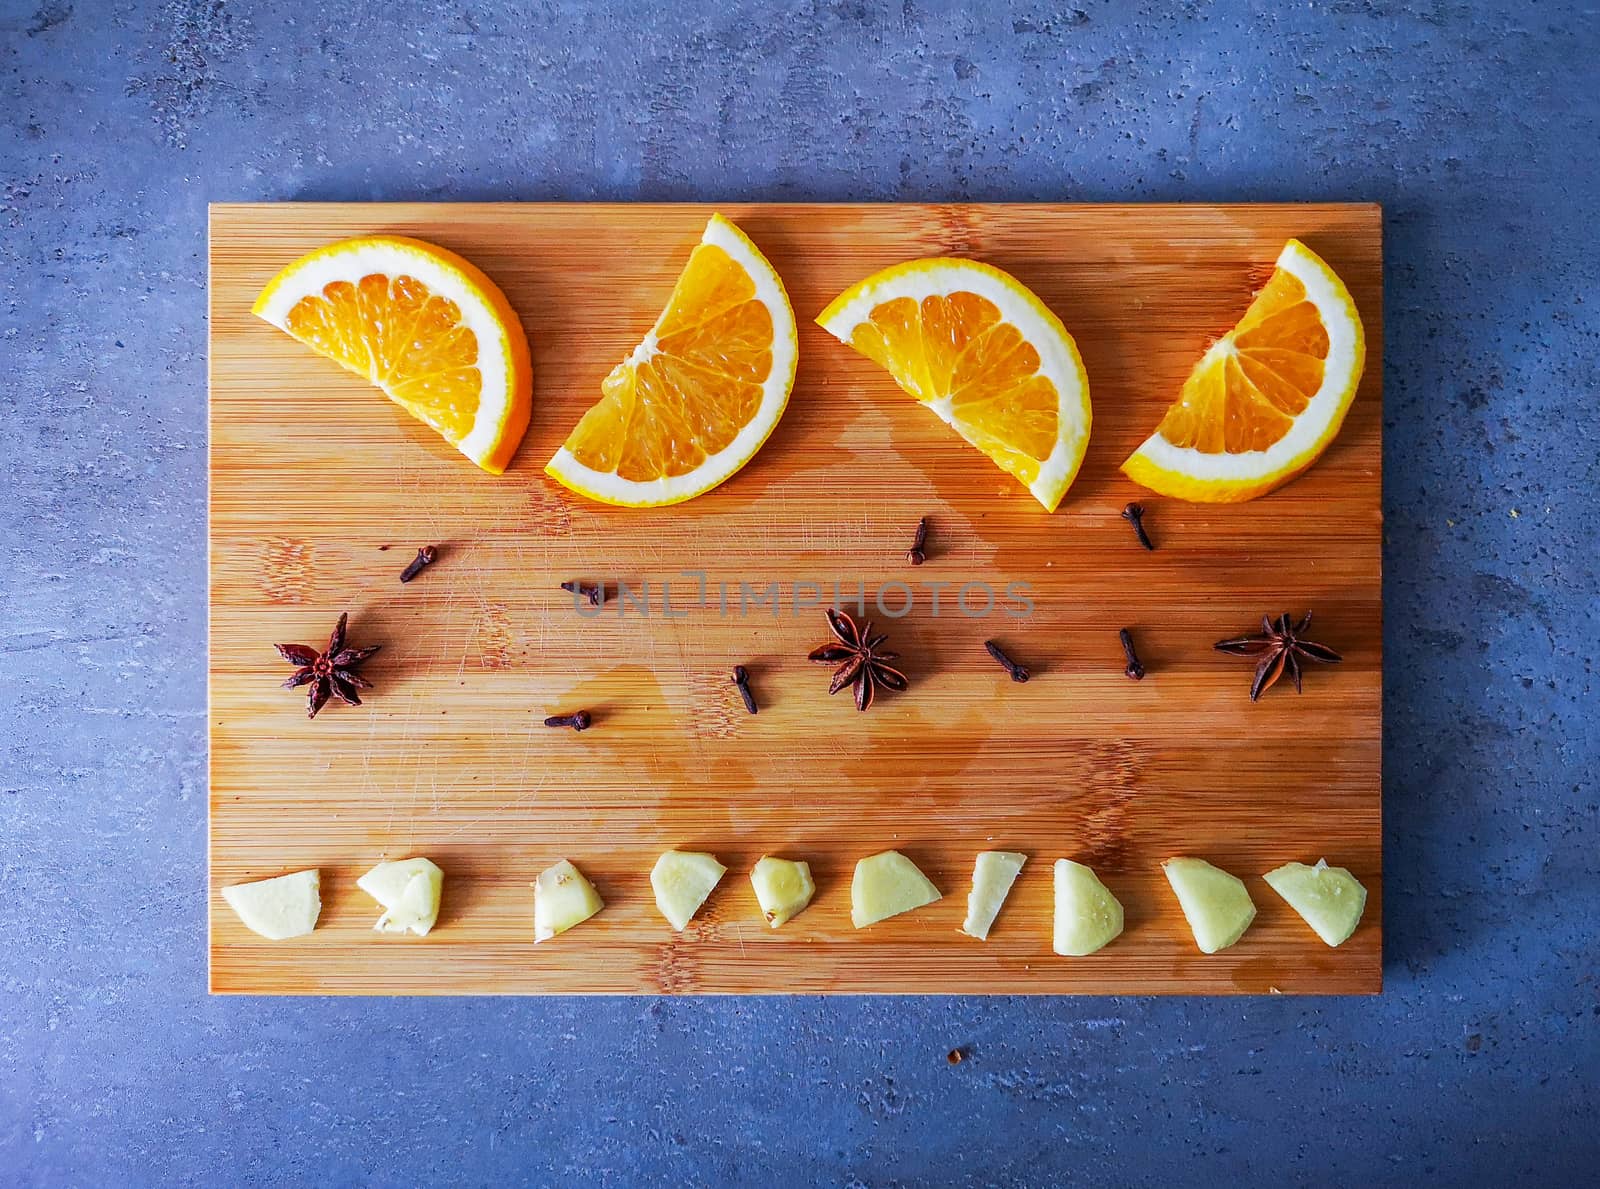 Oranges cloves anise ginger on wooden board as ingredients for mulled wine or beer